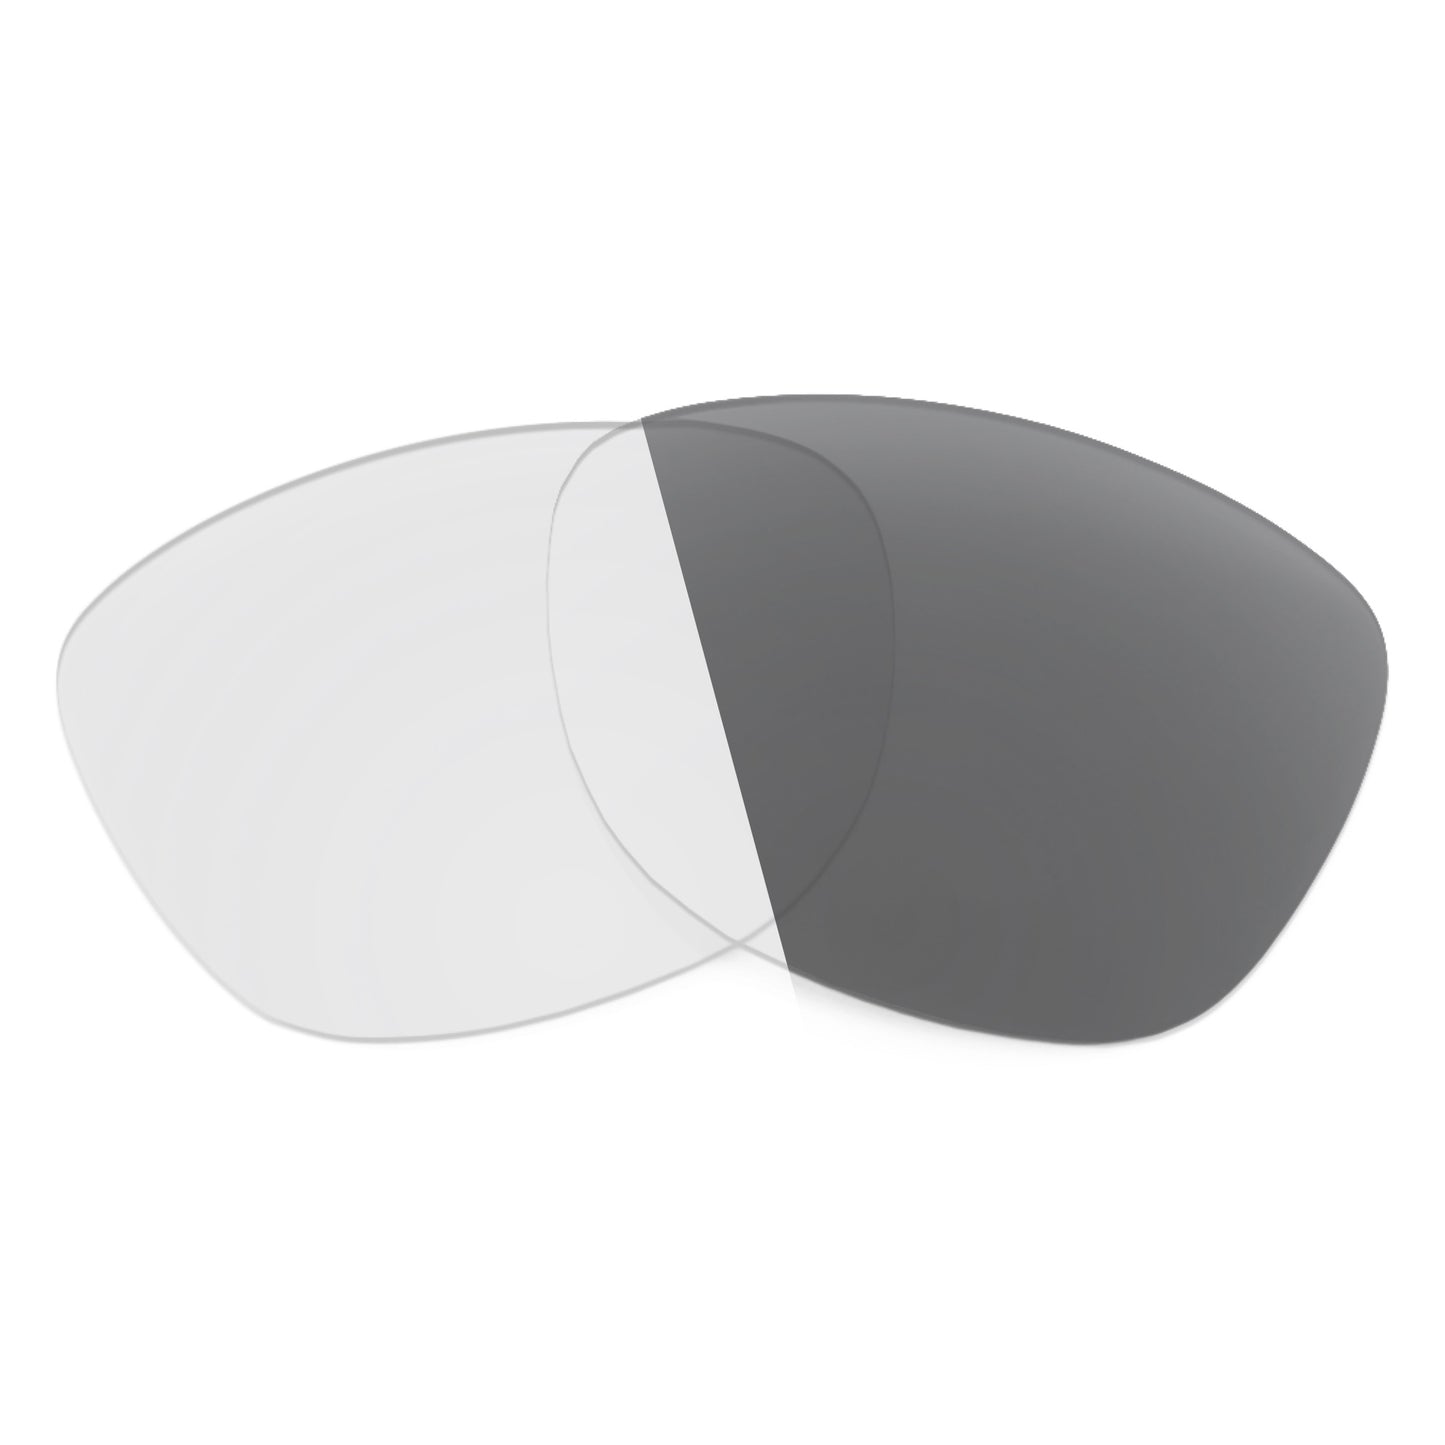 Revant replacement lenses for Ray-Ban New Wayfarer Liteforce RB4207 52mm Non-Polarized Adapt Gray Photochromic